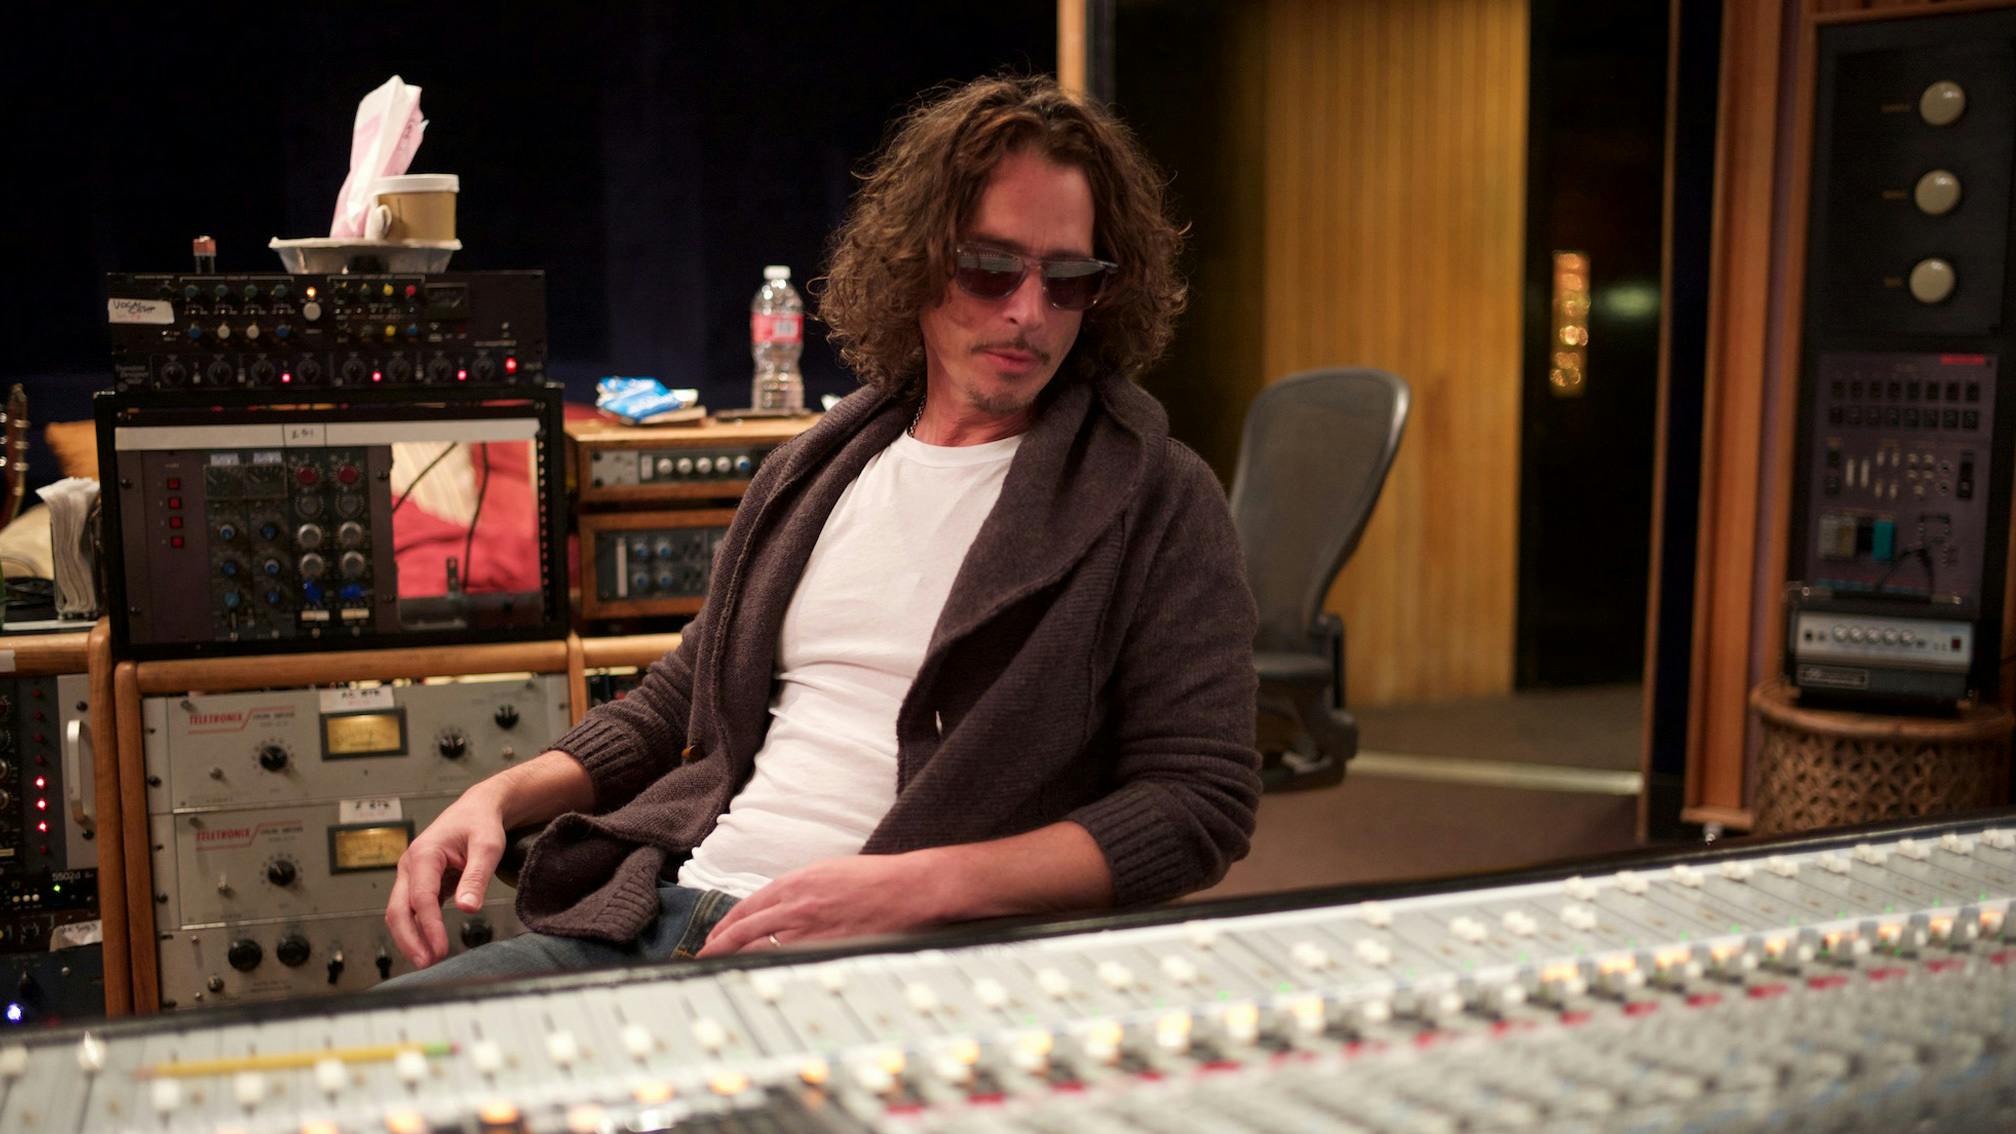 Vicky Cornell: "All of Chris' music, including Soundgarden, will see the light of day"